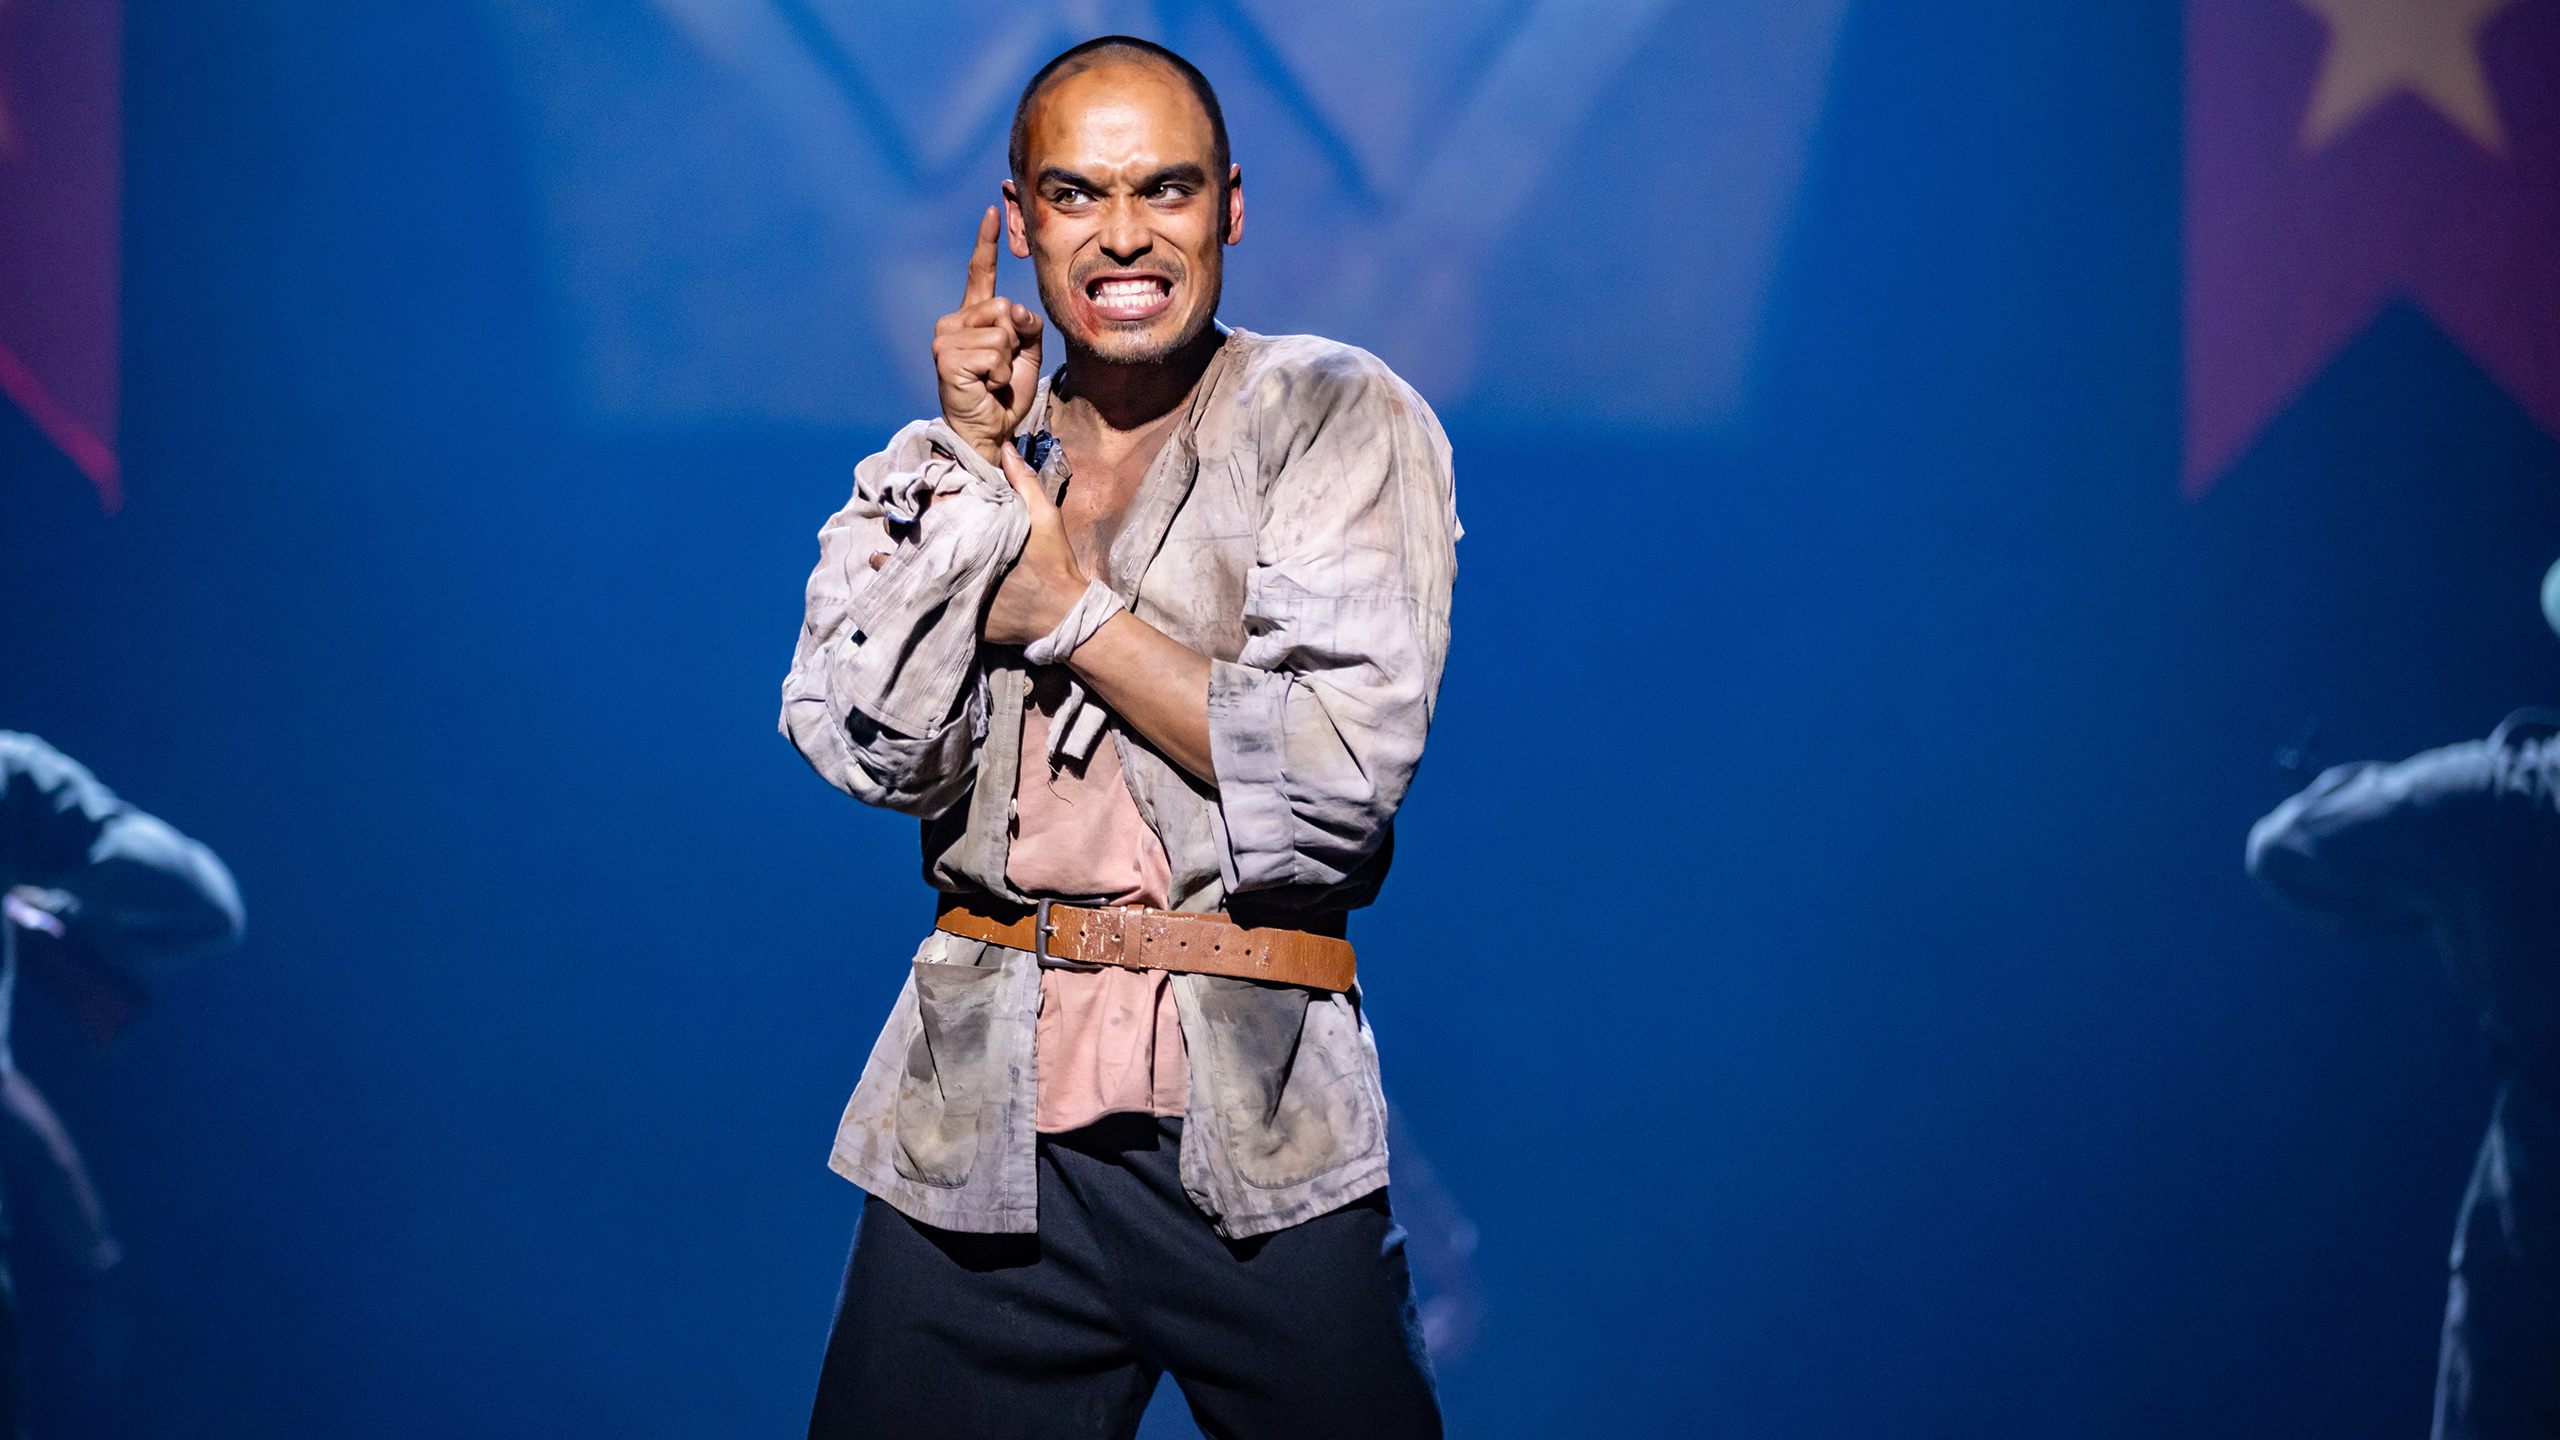 An Asian man with tanned skin and shaved hair wears a shirt with dirt on it and a belt. He is singing.